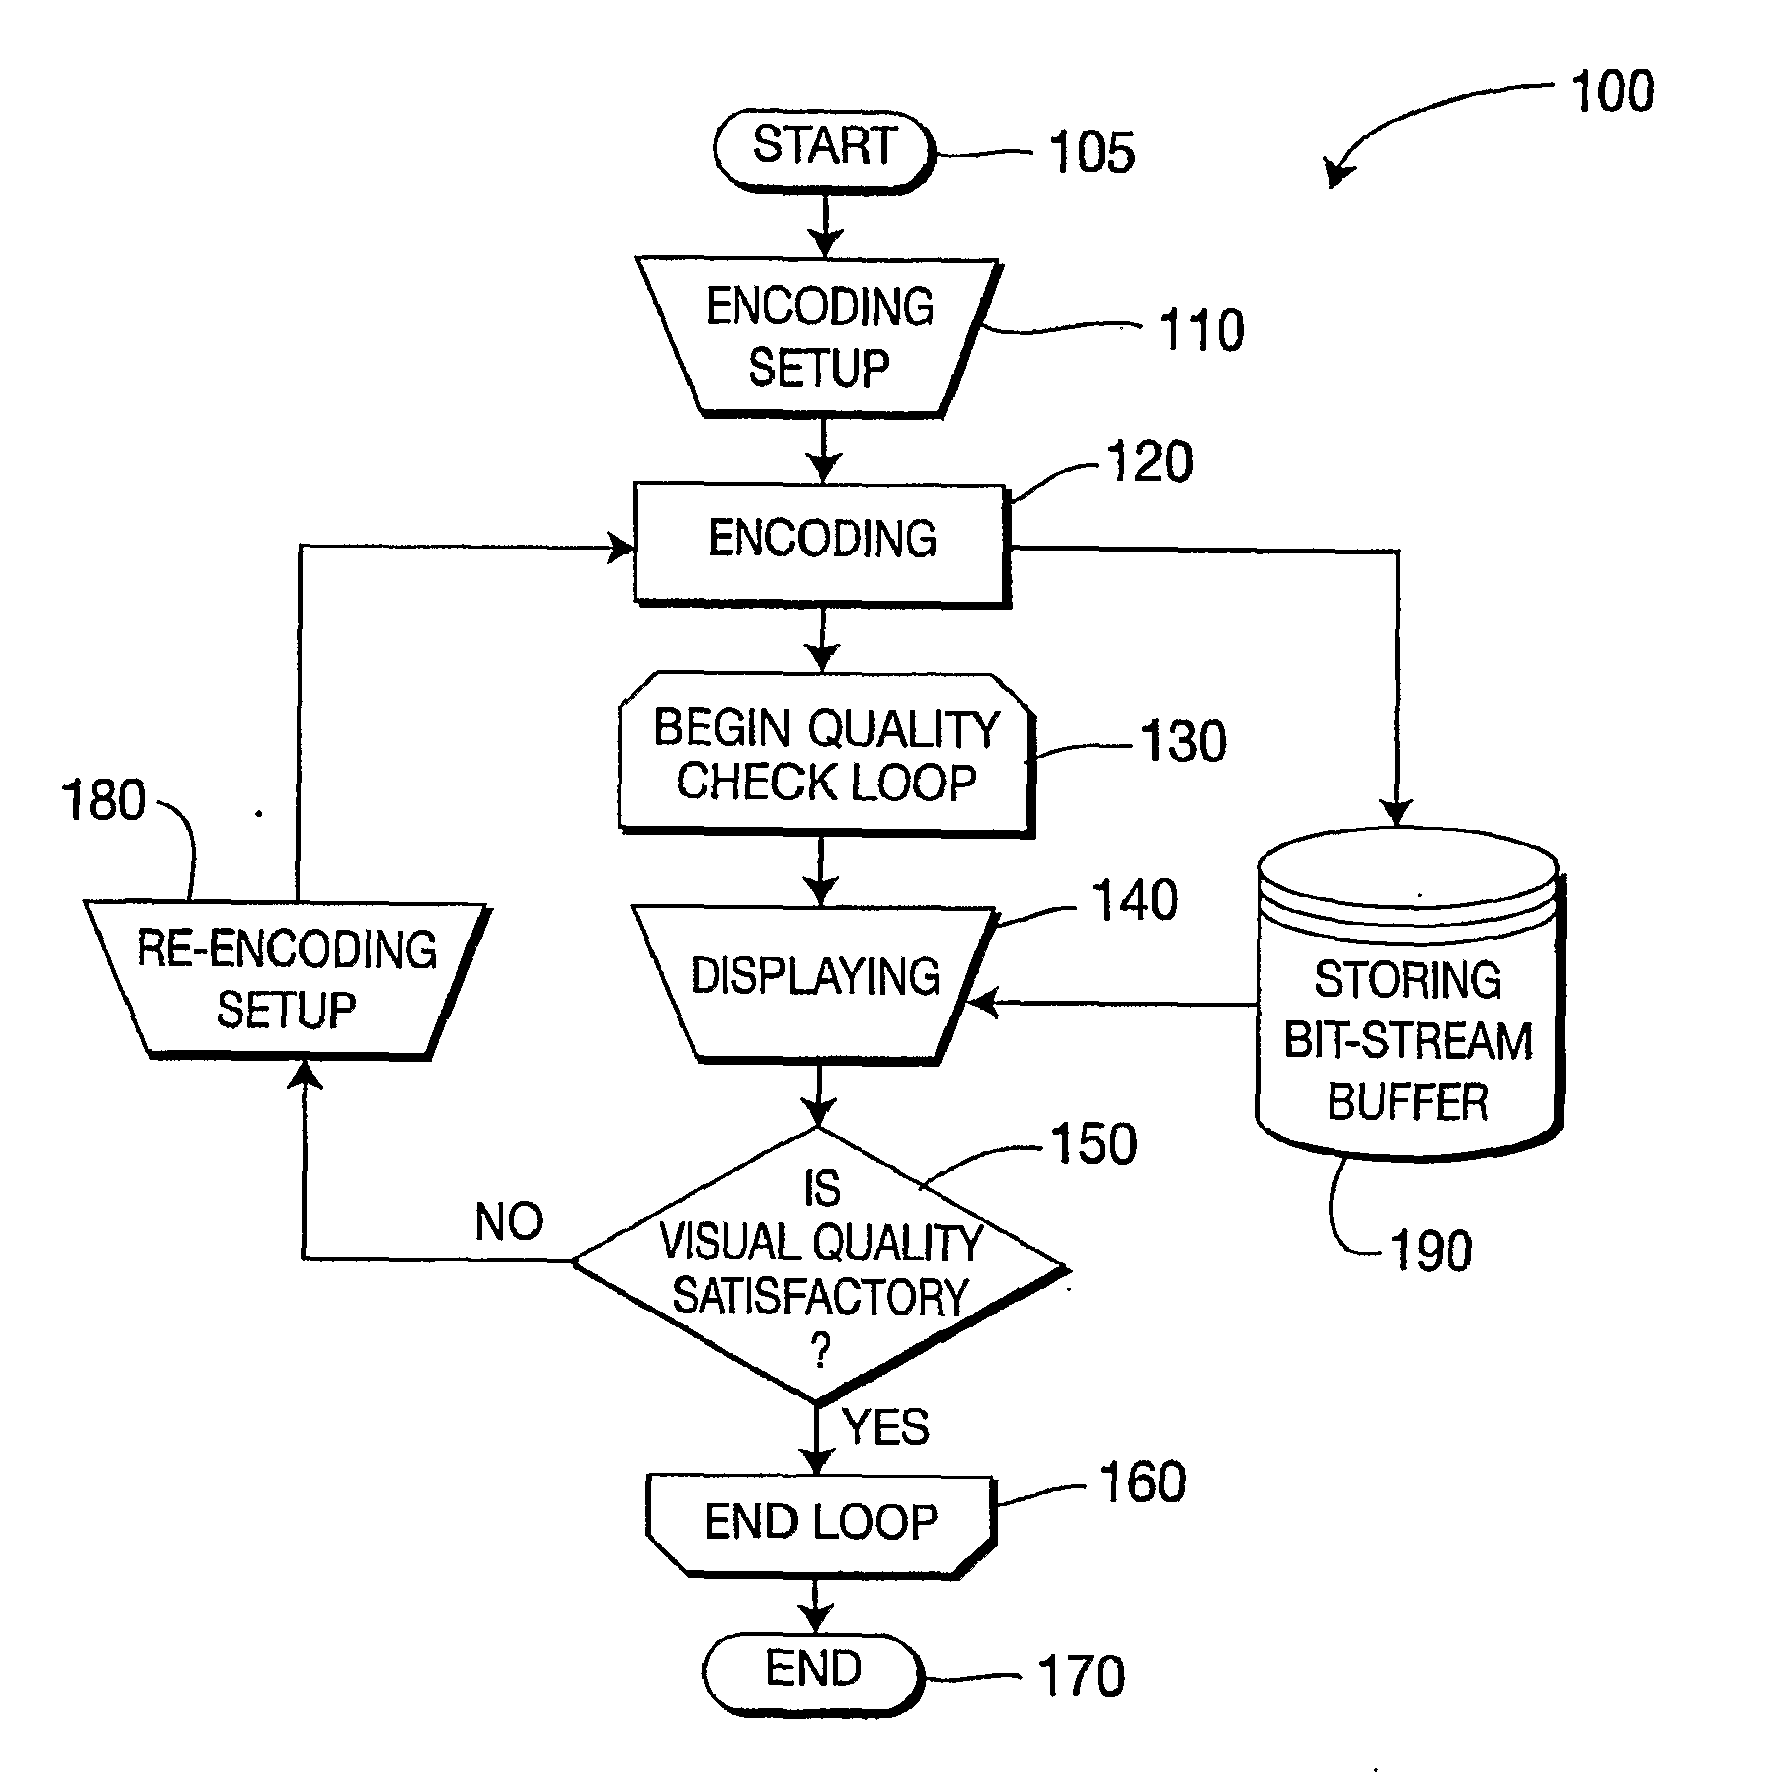 Methods and apparatus for enhanced performance in a multi-pass video recorder